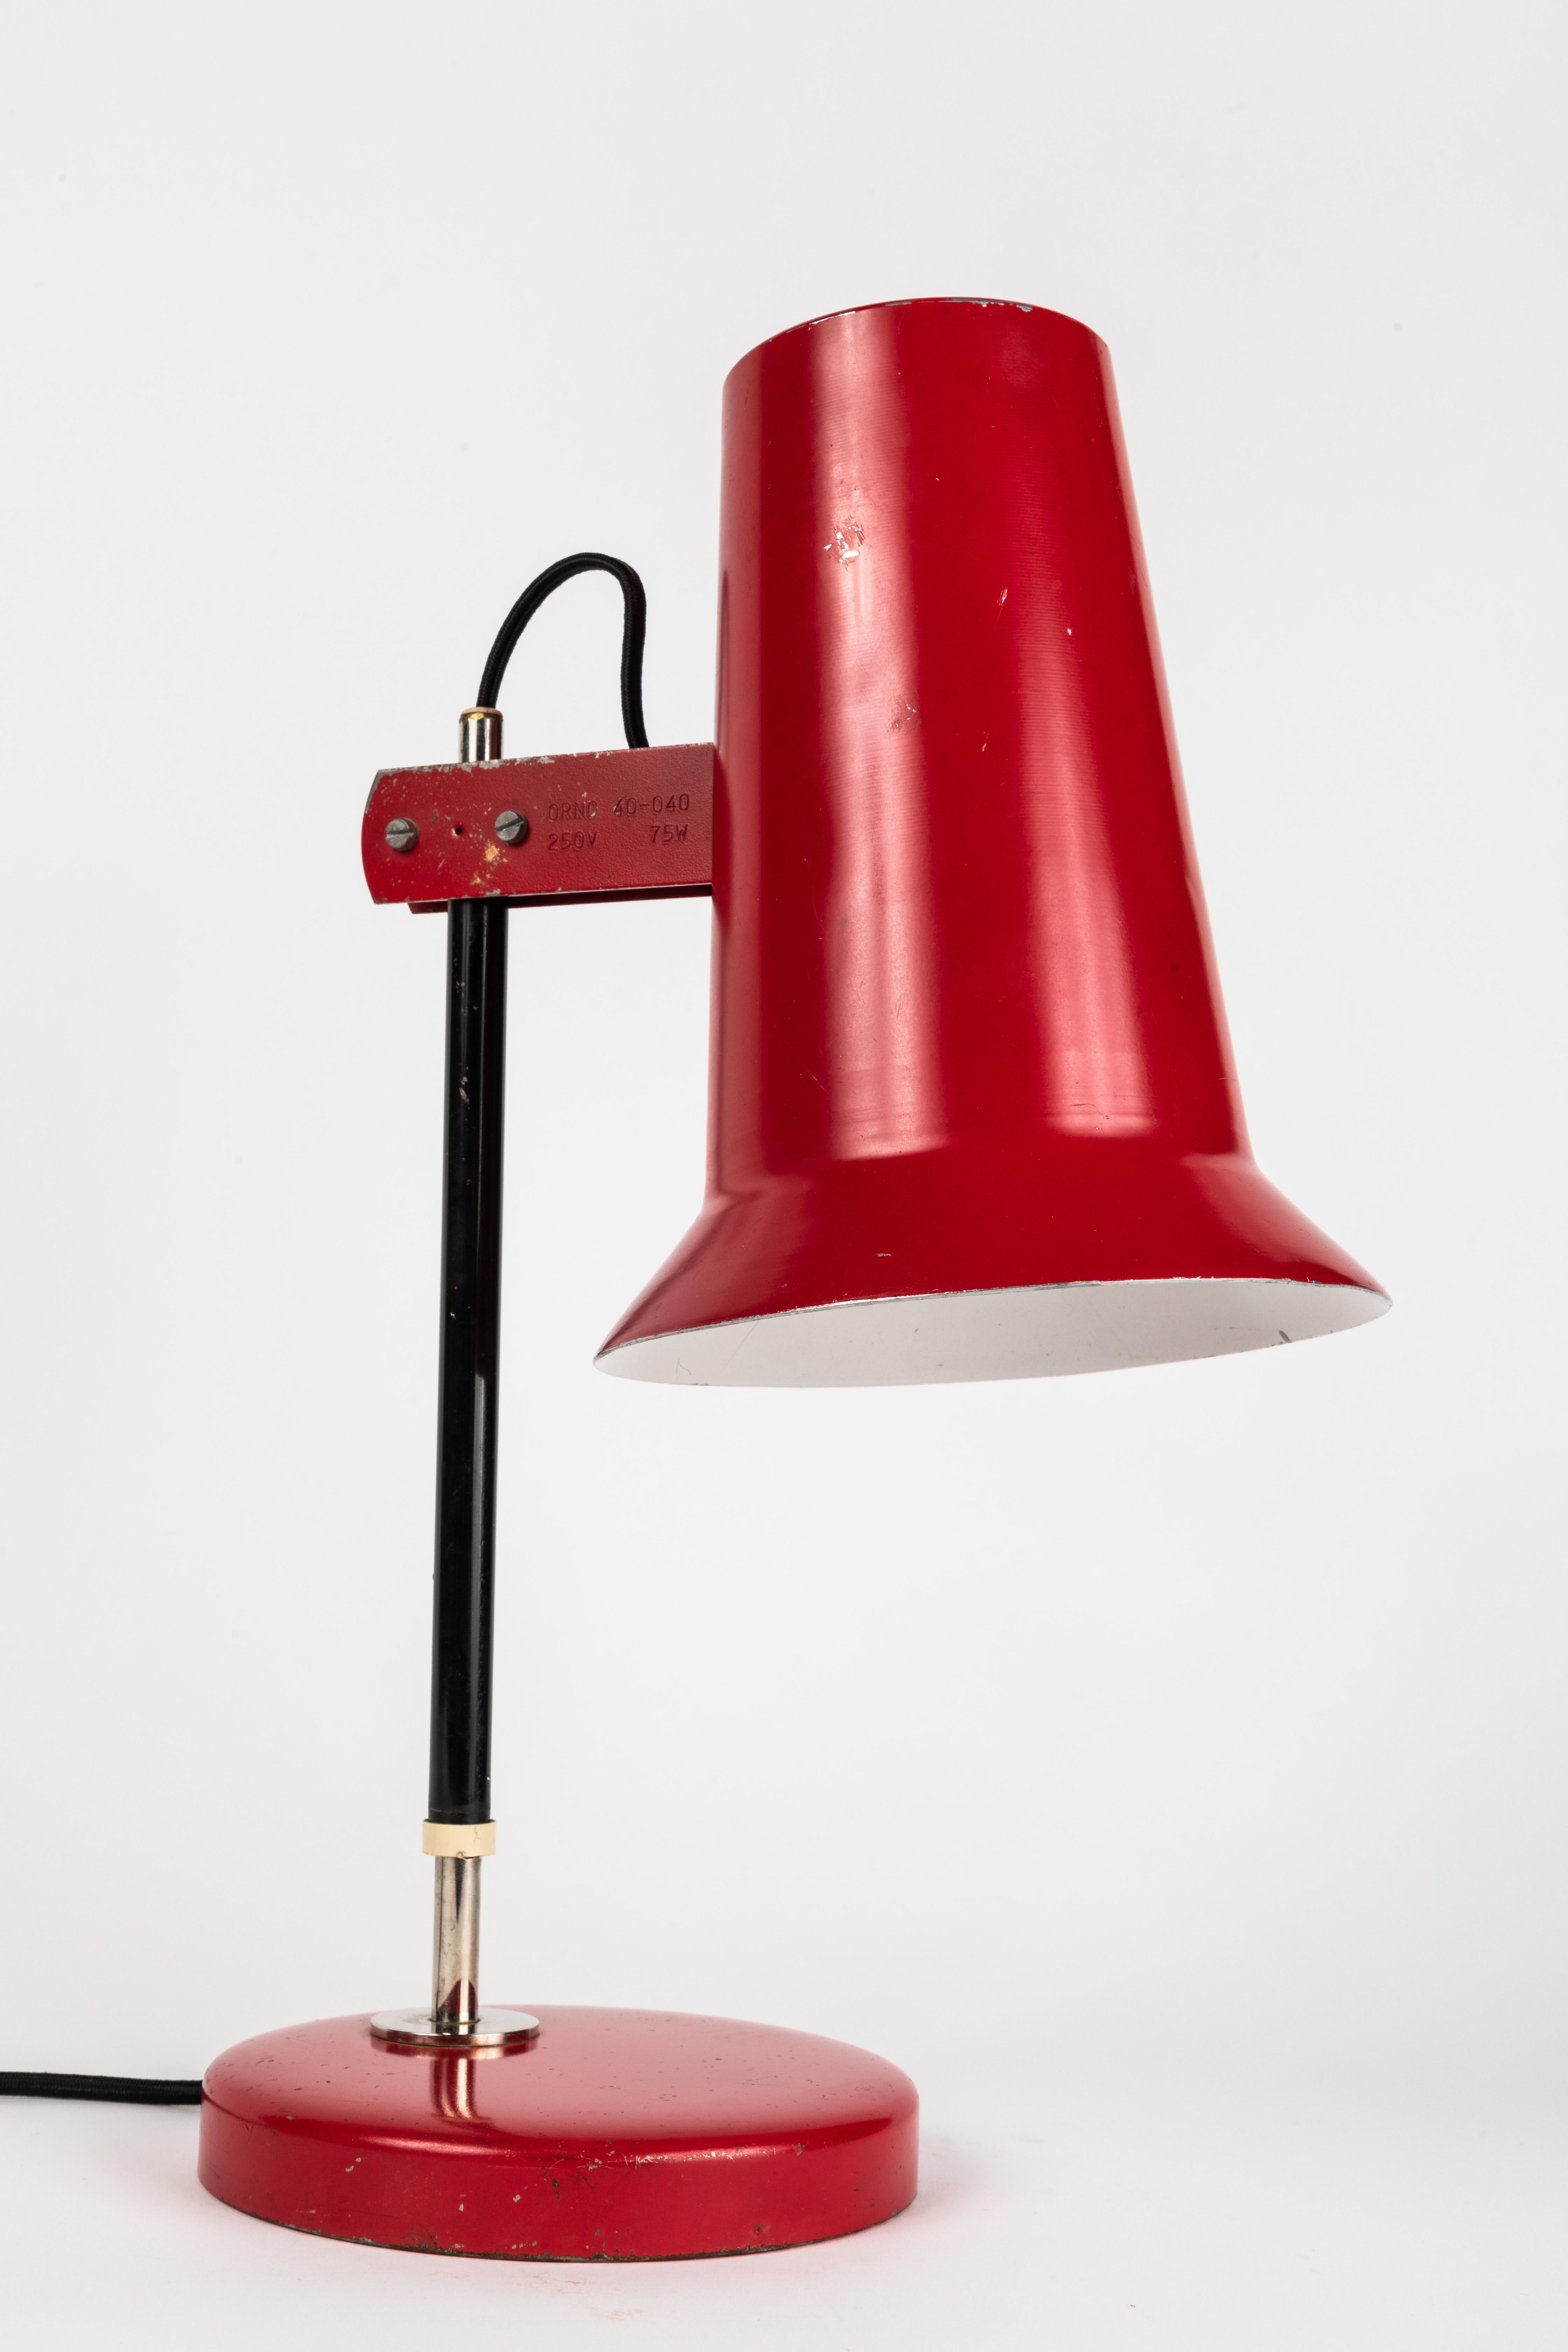 Painted 1960s Yki Nummi Series 40-040 Red Table Lamp for Stockman Orno